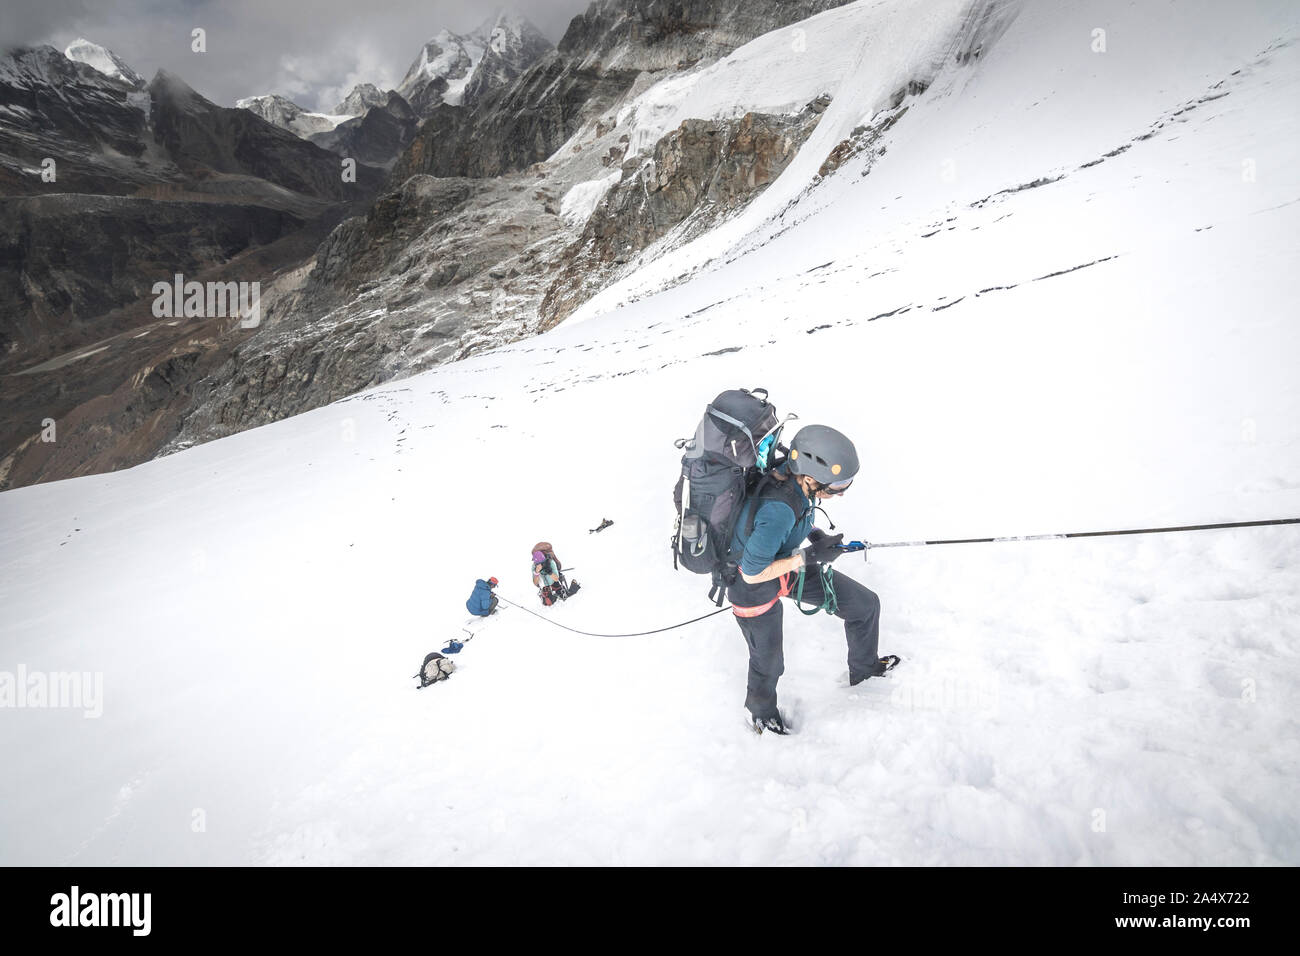 A woman climber ascends a fixed line on a steep snow slope Stock Photo